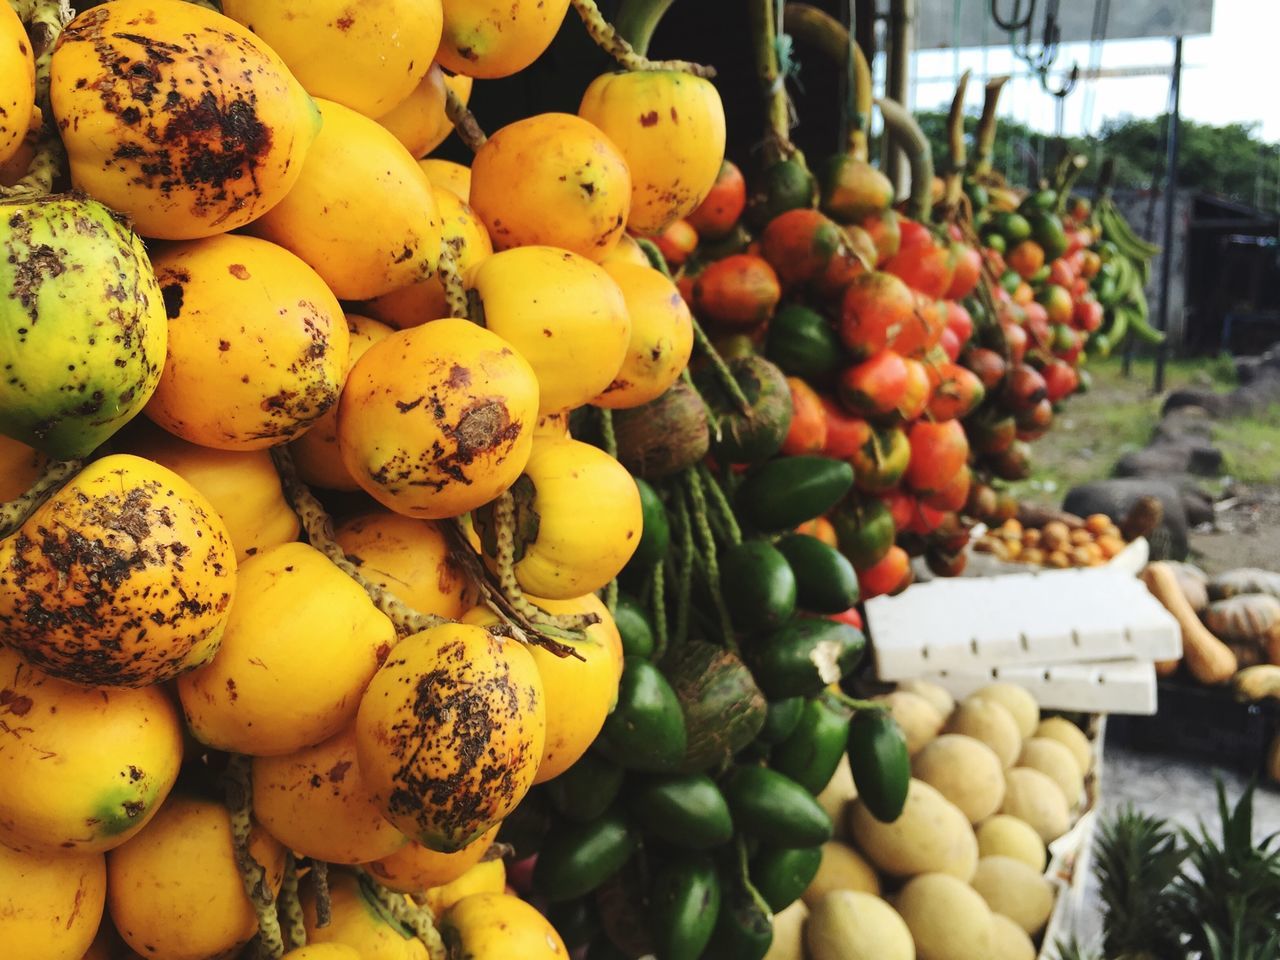 food and drink, freshness, food, healthy eating, fruit, for sale, abundance, market stall, market, large group of objects, retail, yellow, ripe, orange - fruit, close-up, focus on foreground, vegetable, organic, variation, choice